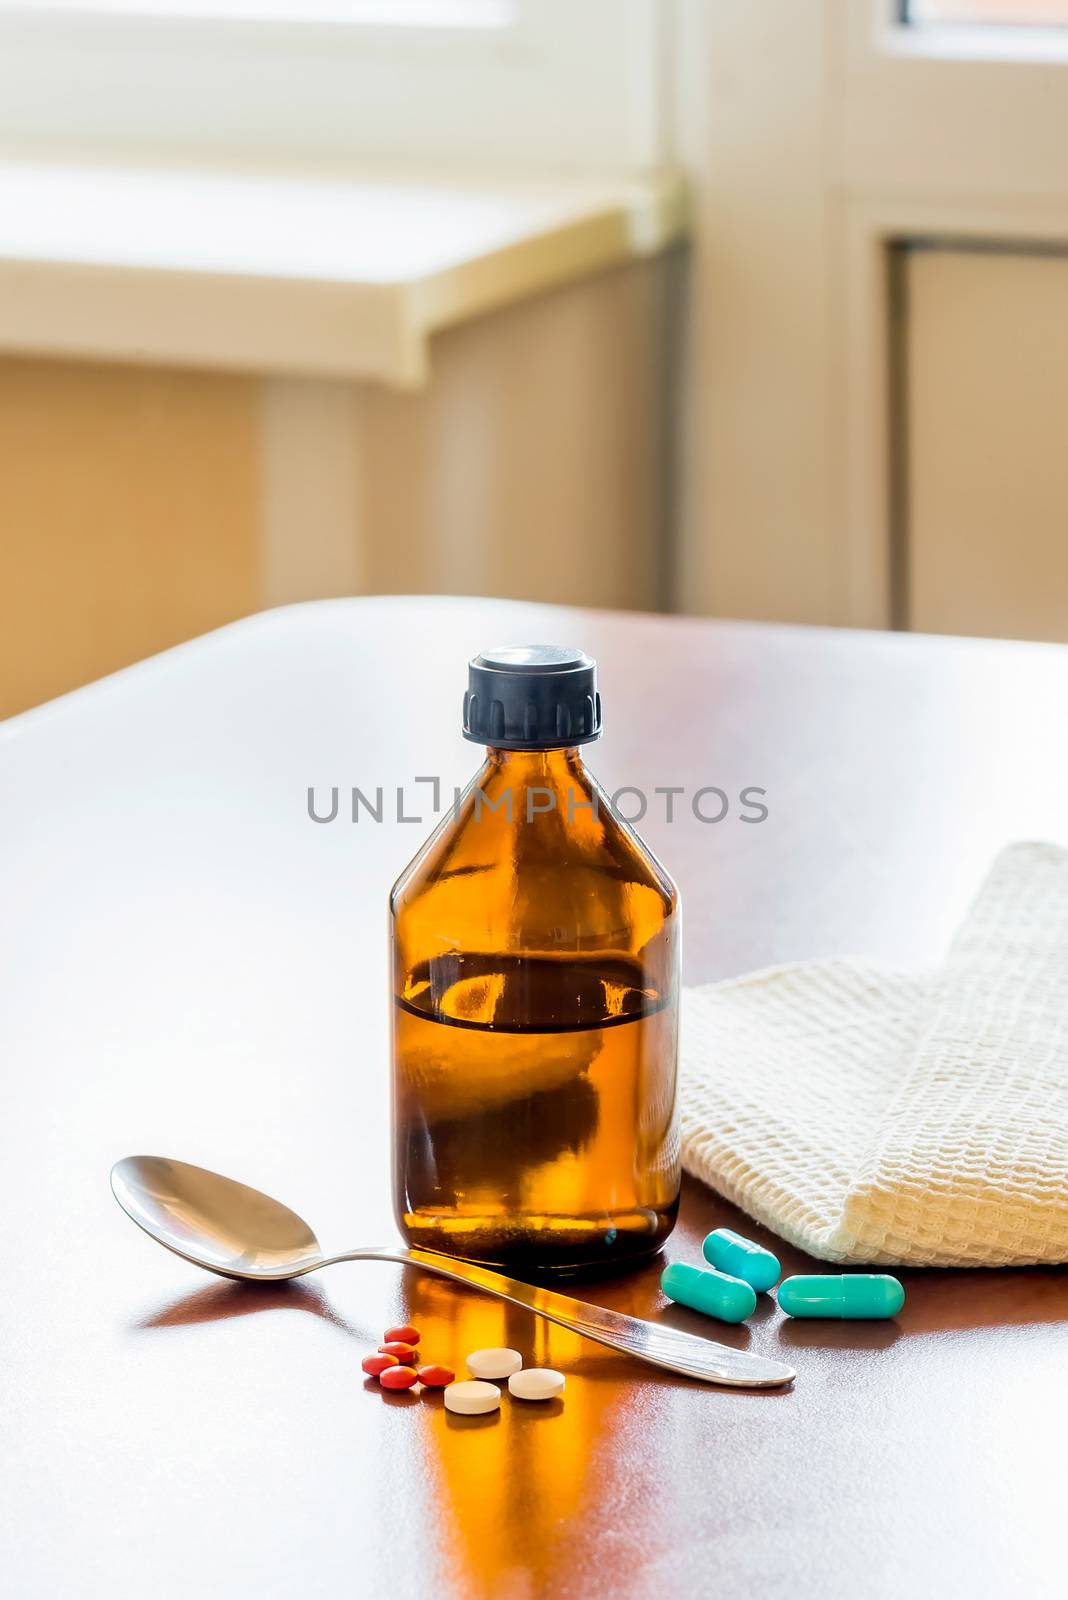 A cough syrup bottle with a spoon and some pills on the table close to the window